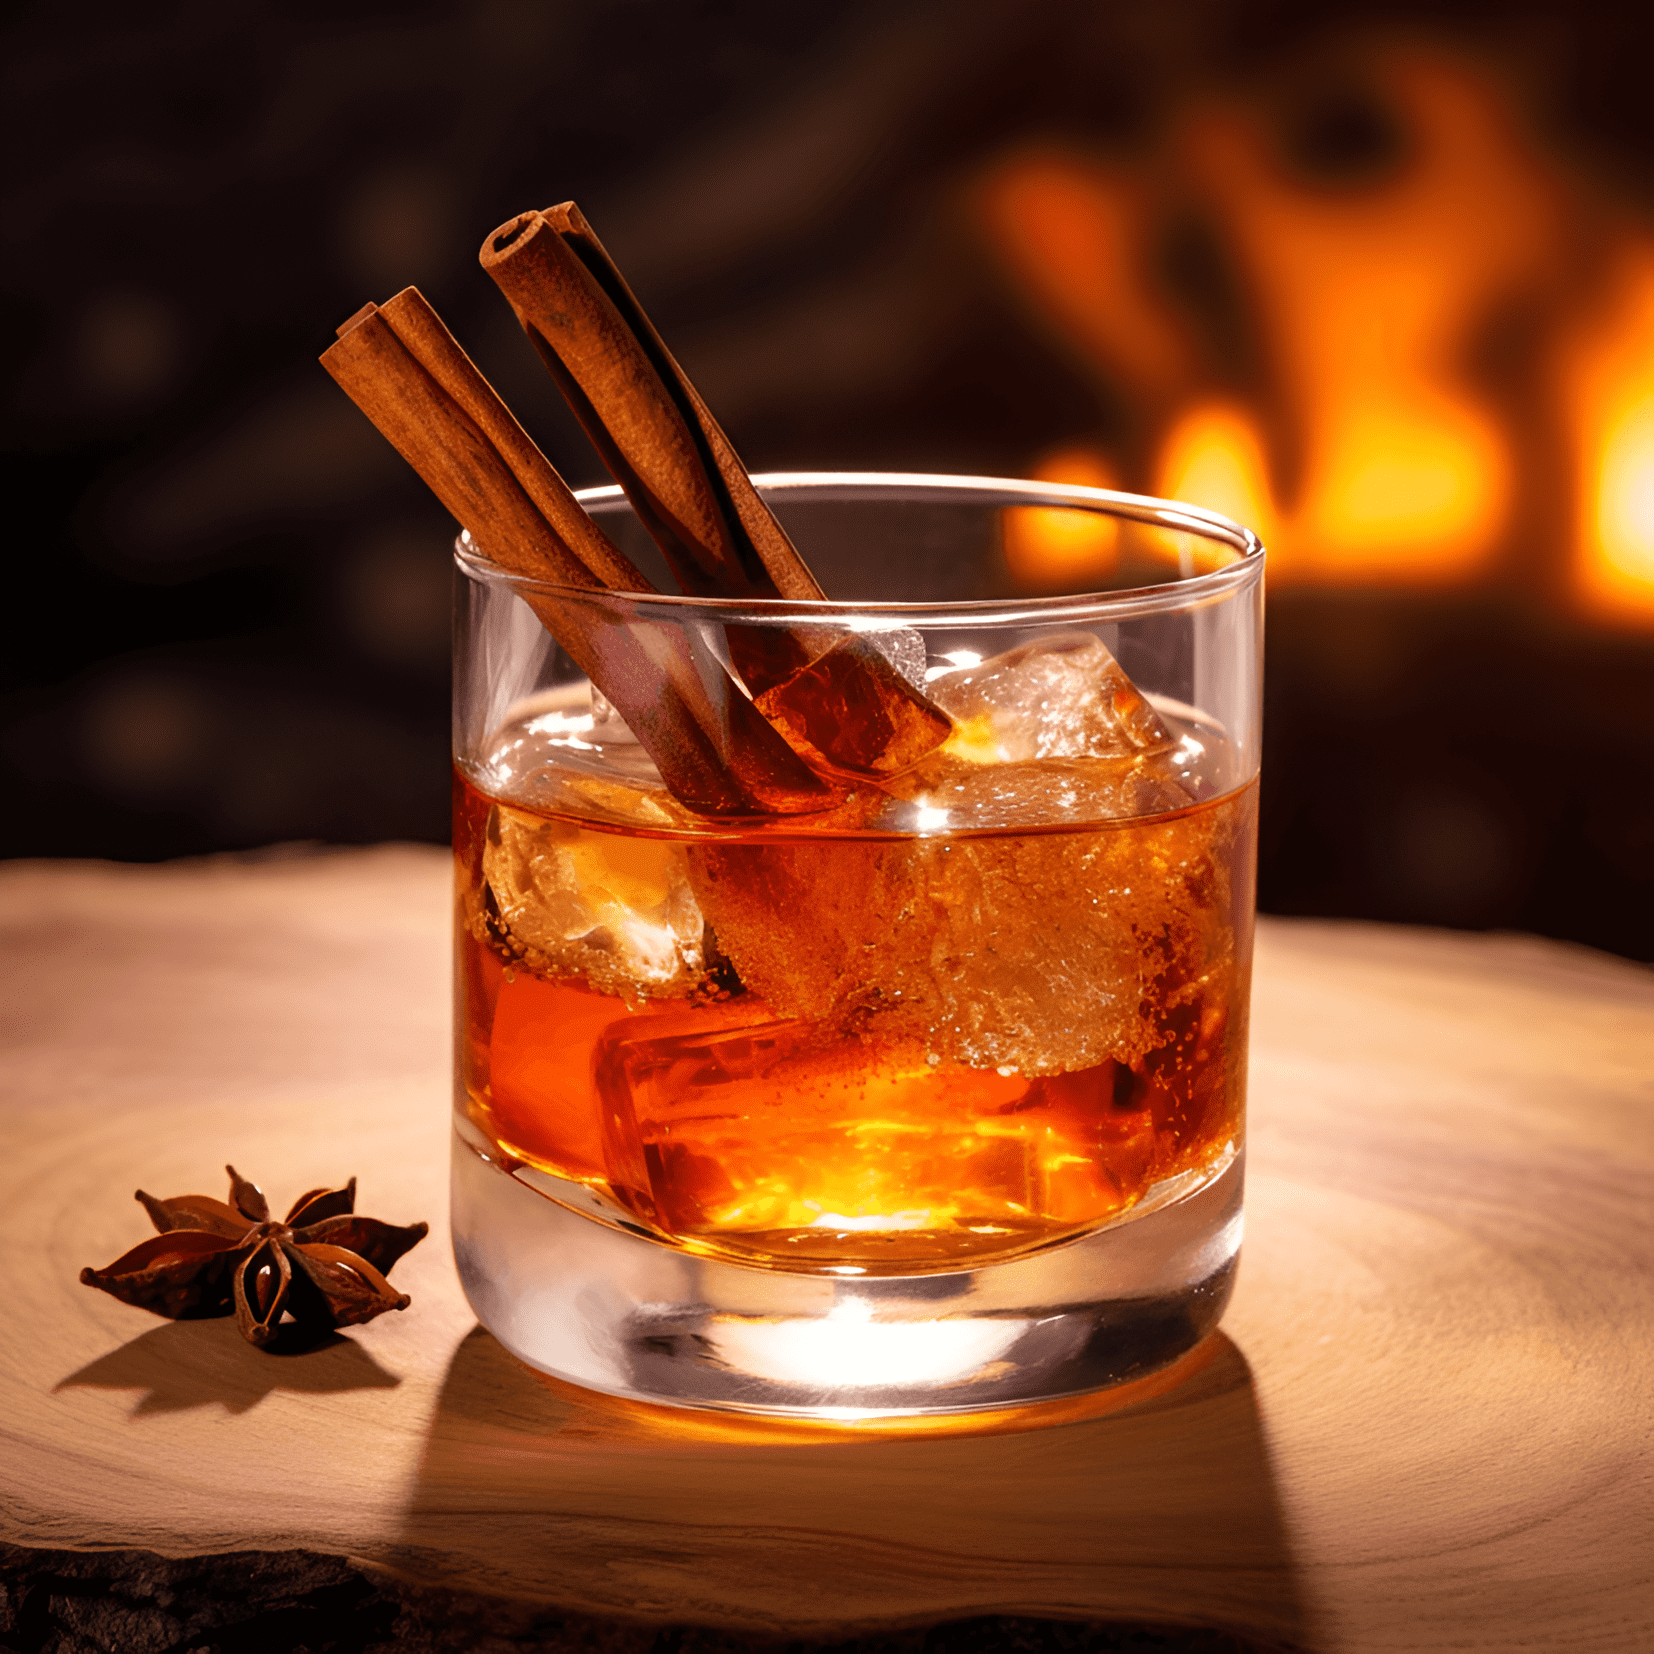 Bonfire Cocktail Recipe - The Bonfire cocktail has a smoky, sweet, and slightly spicy taste. It is a well-balanced drink with a hint of warmth and a smooth finish.